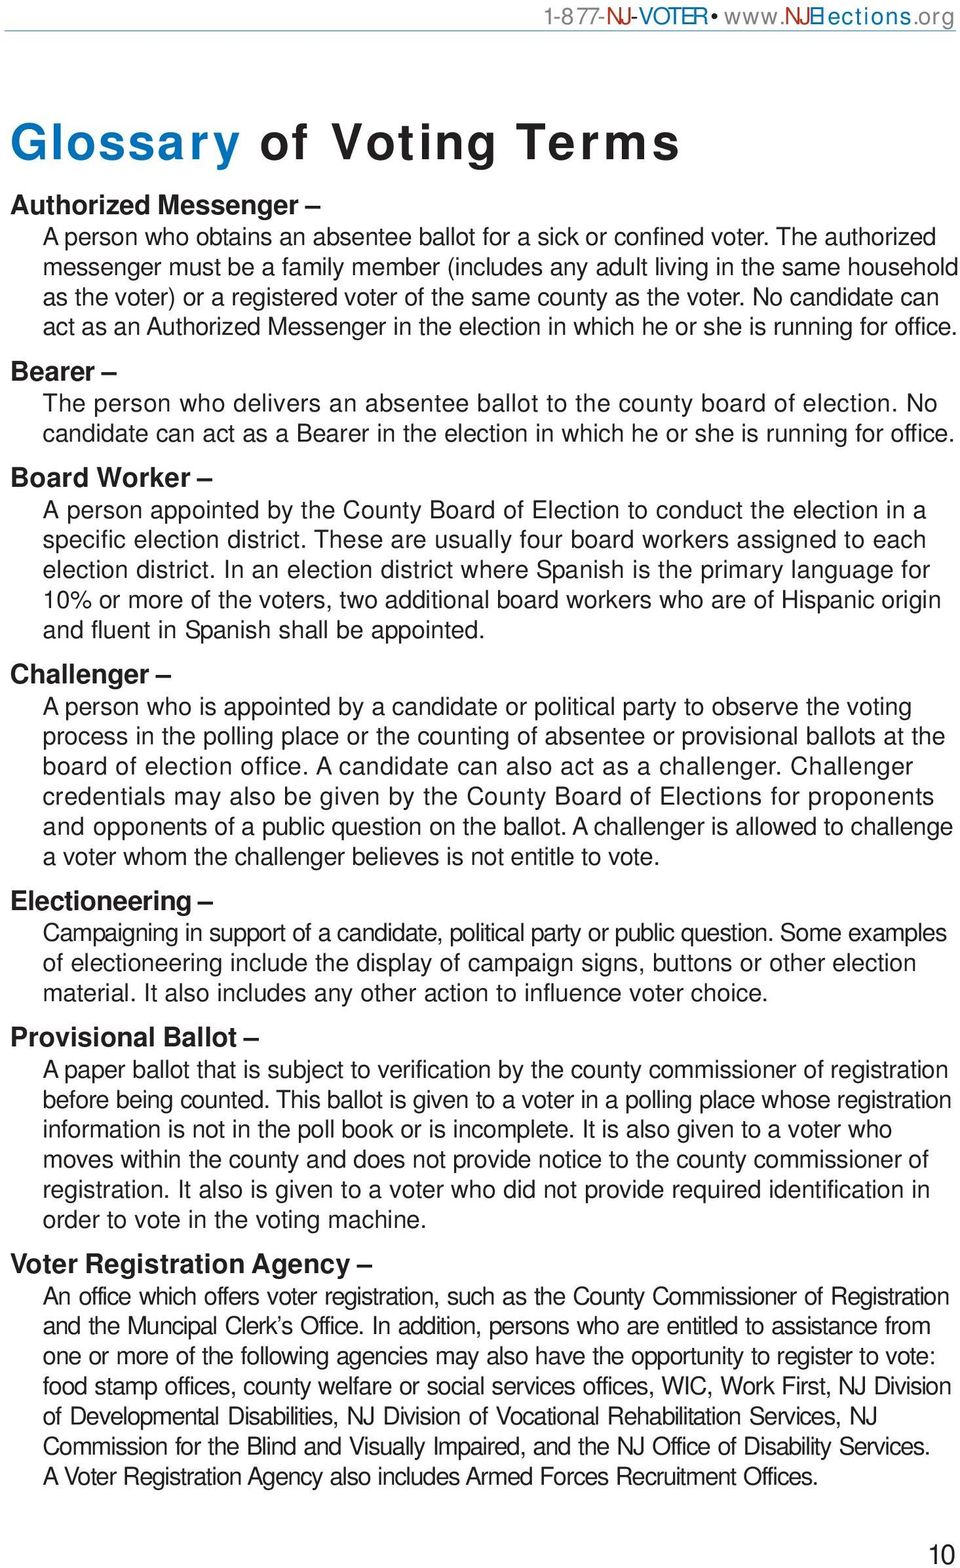 No candidate can act as an Authorized Messenger in the election in which he or she is running for office. Bearer The person who delivers an absentee ballot to the county board of election.